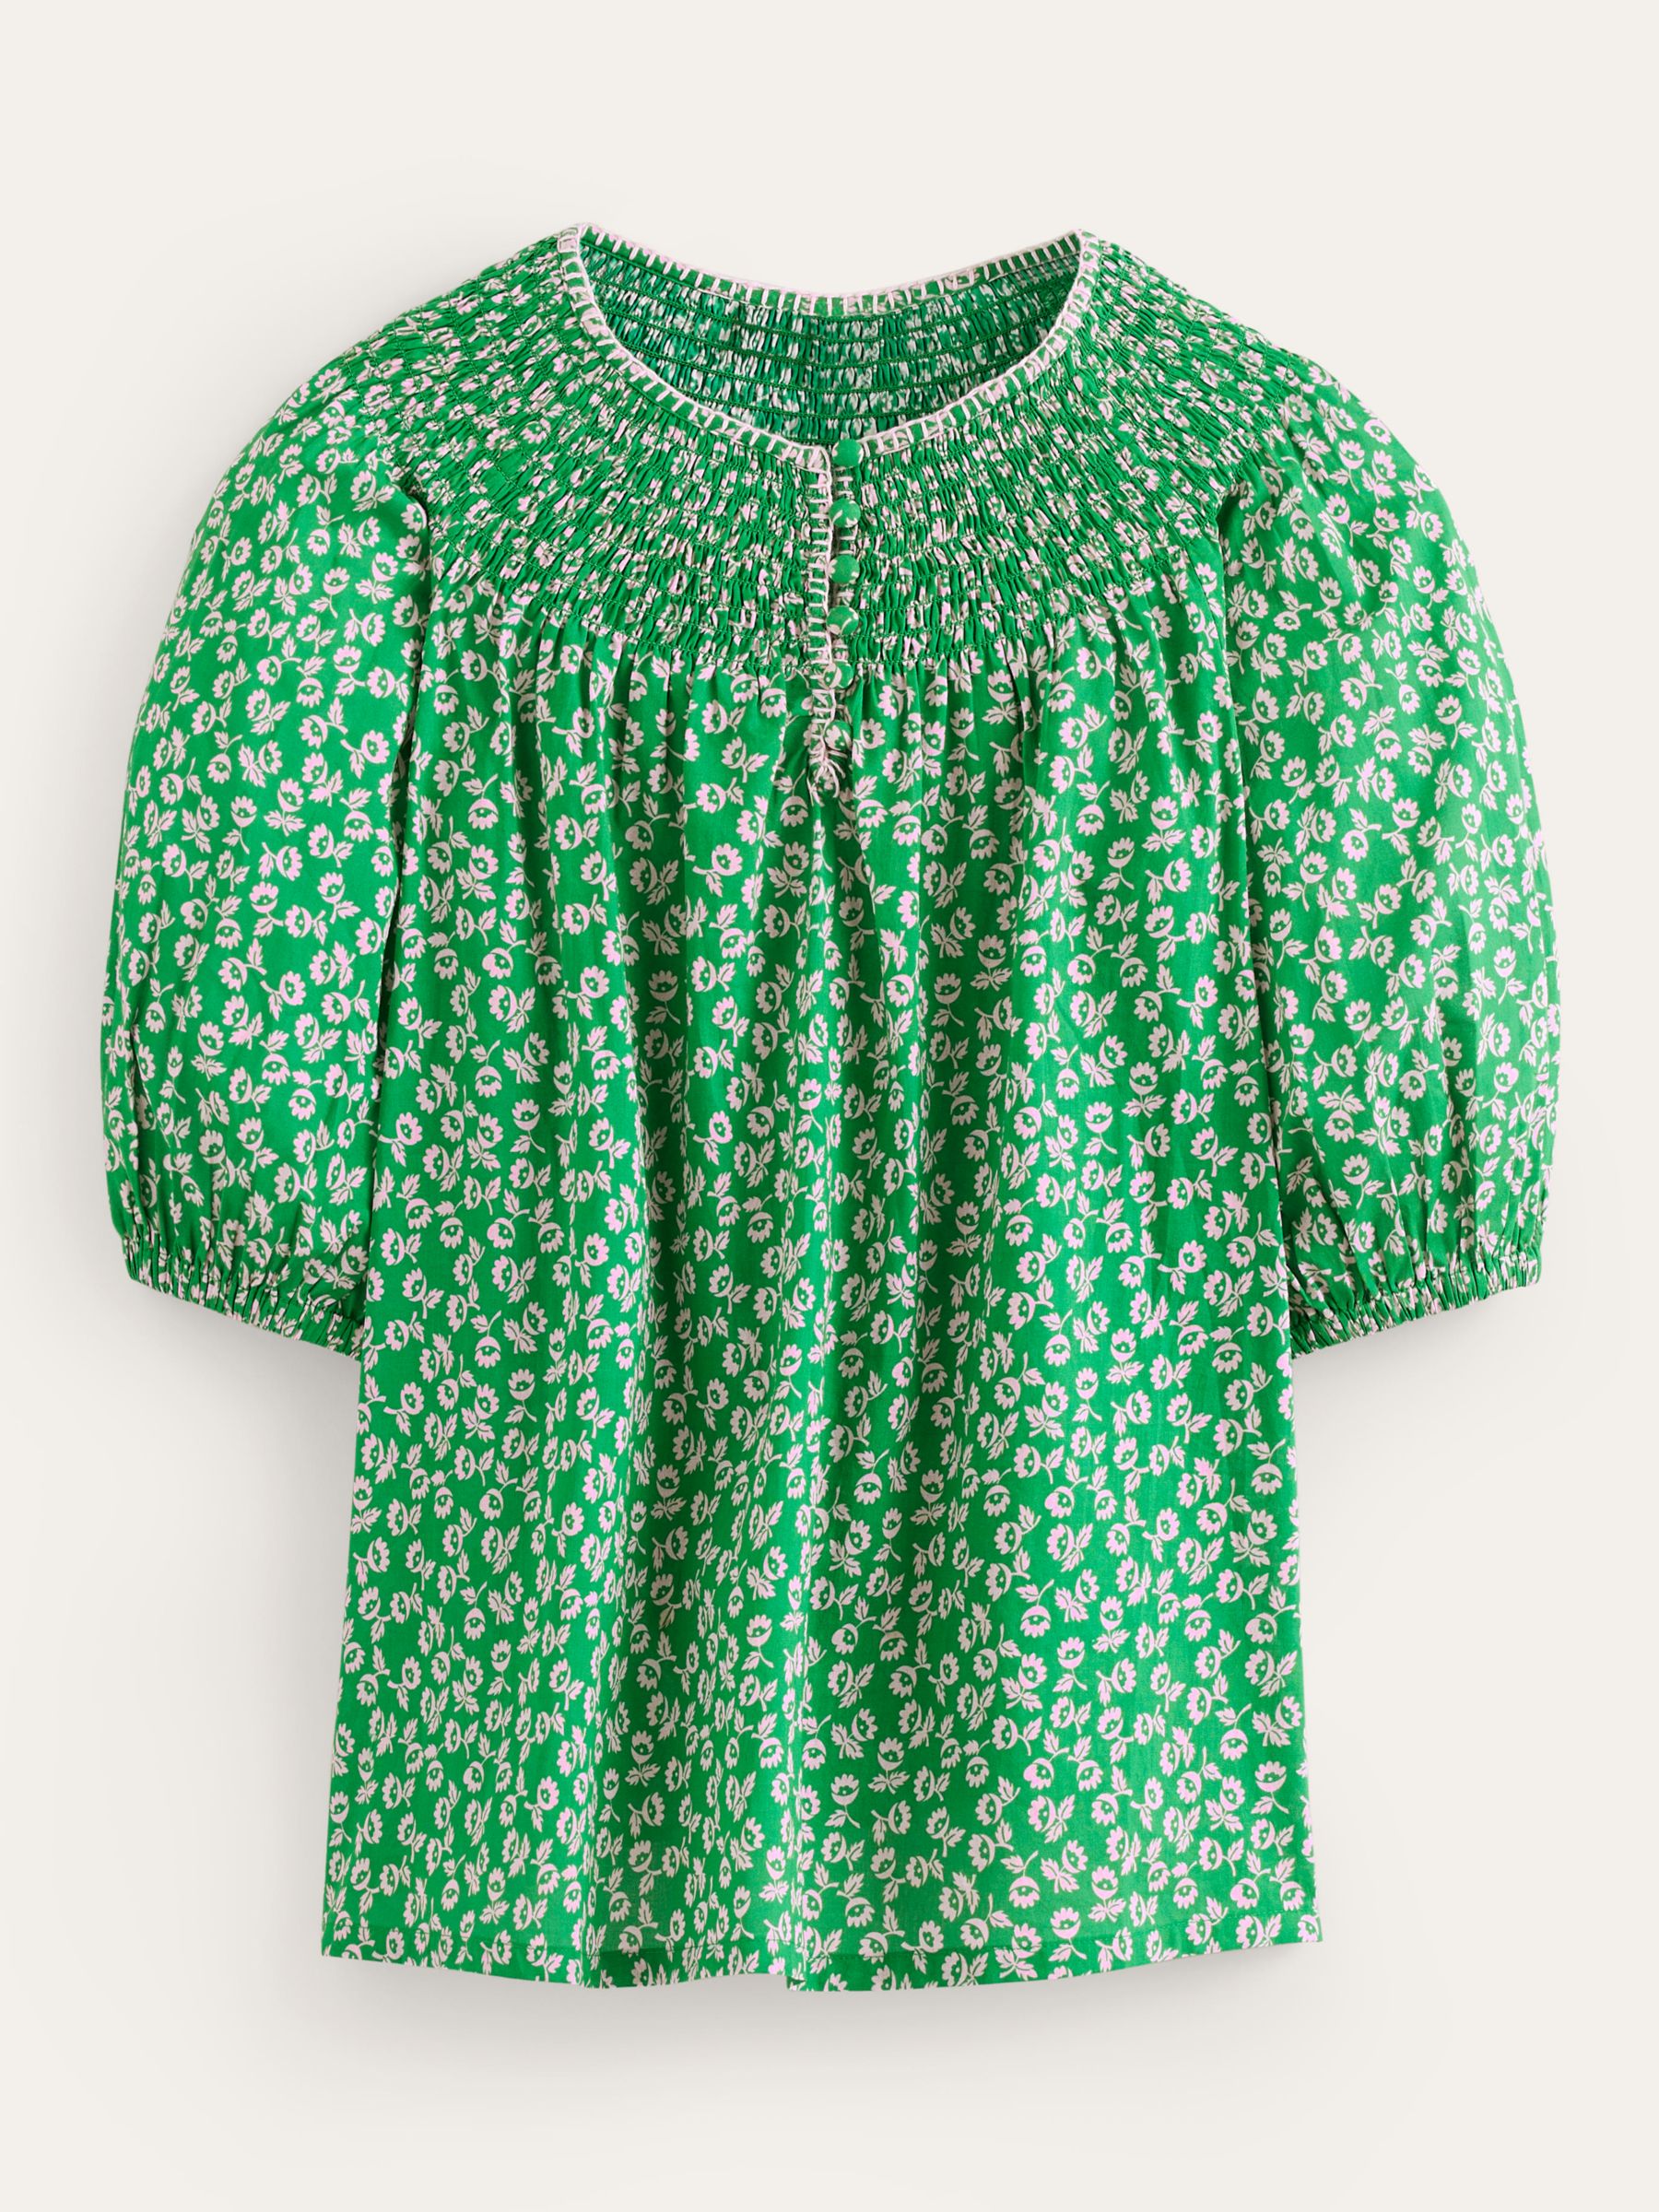 Boden Easy Stitch Ditsy Bud Floral Top, Green, 8